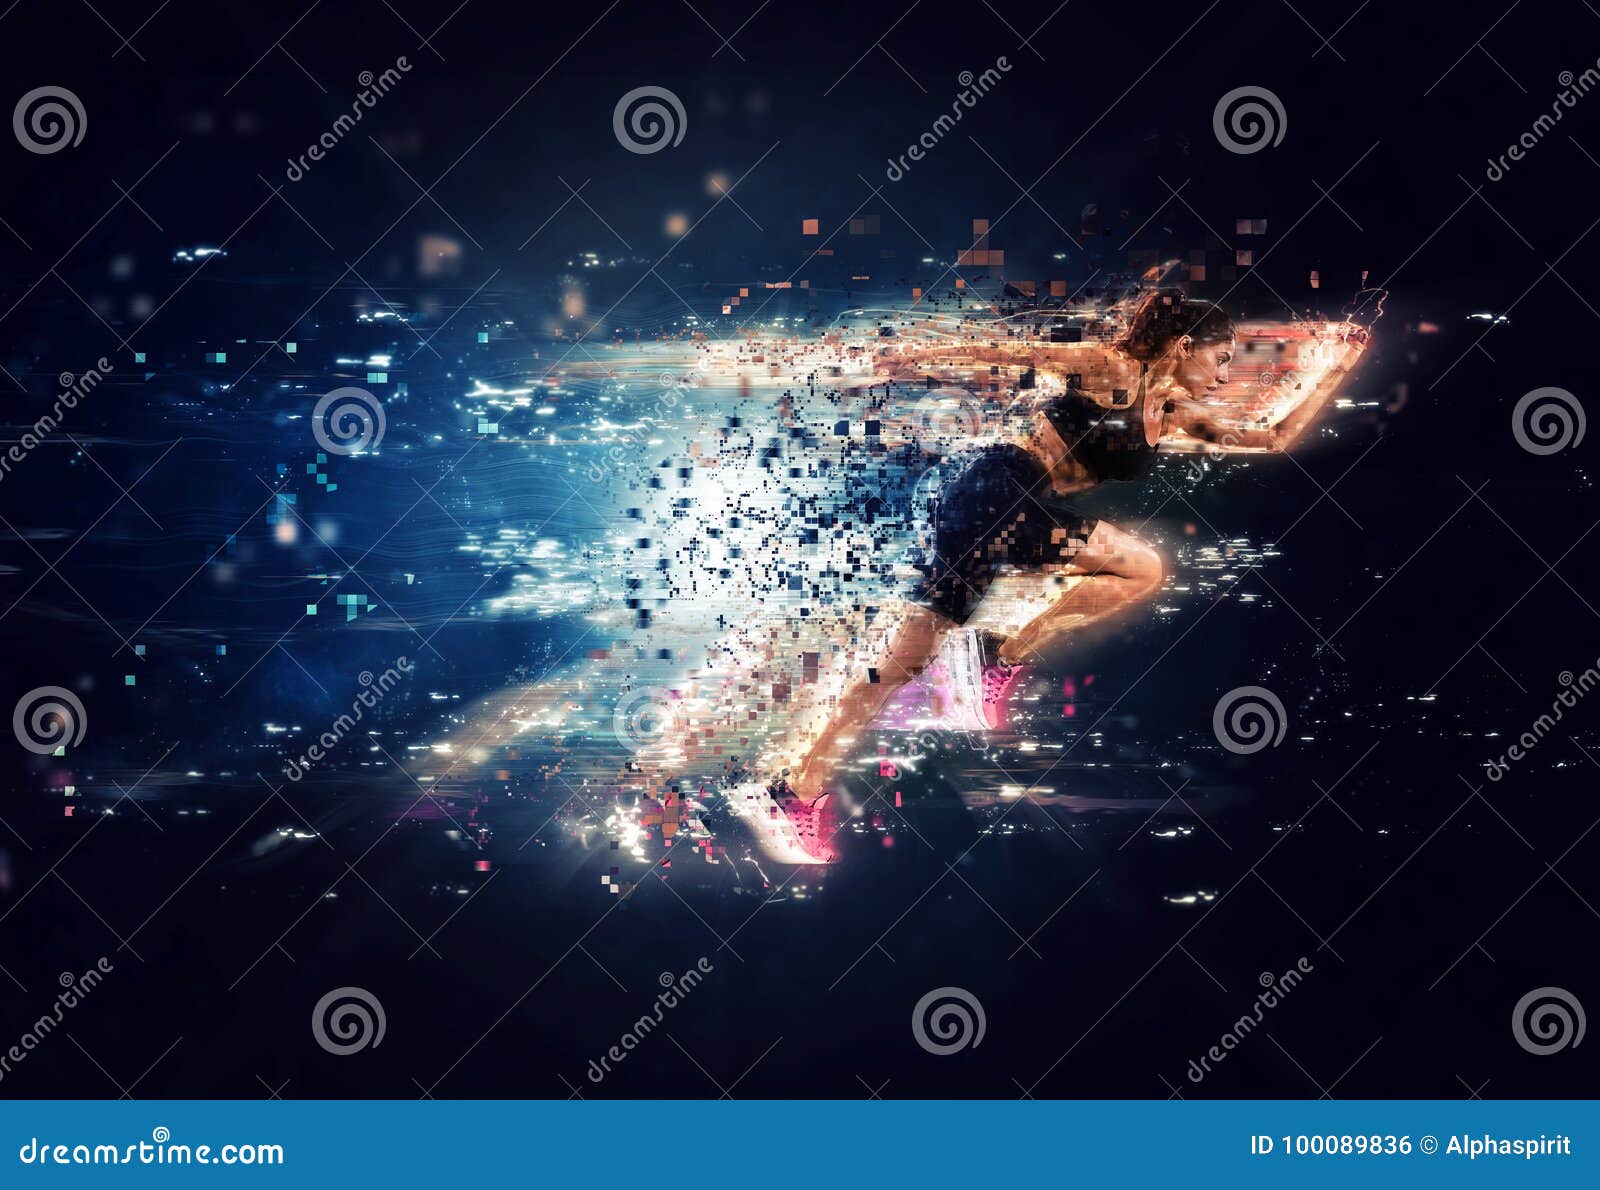 athletic woman fast runner with futuristic effects